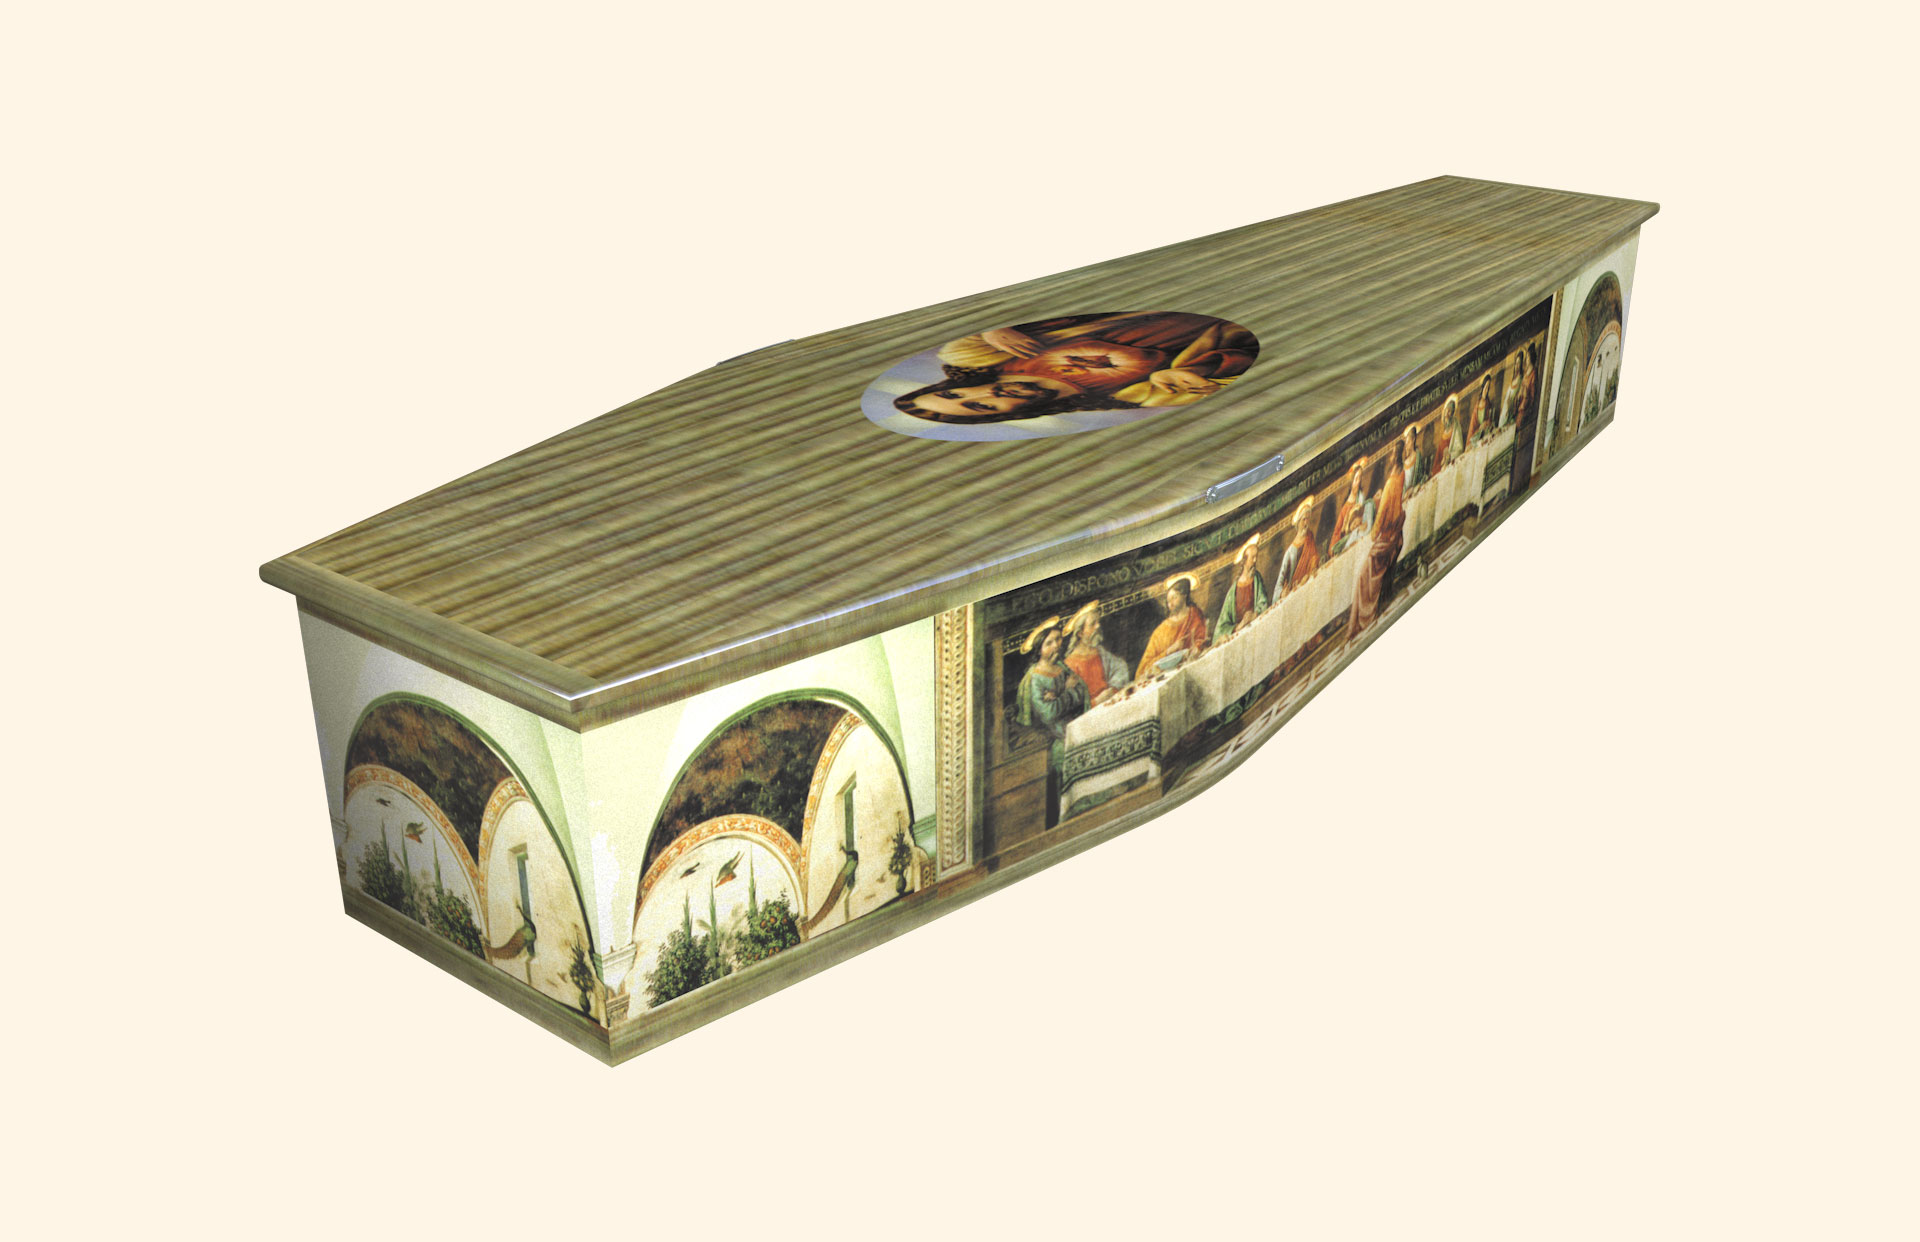 Last Supper design on a traditional coffin